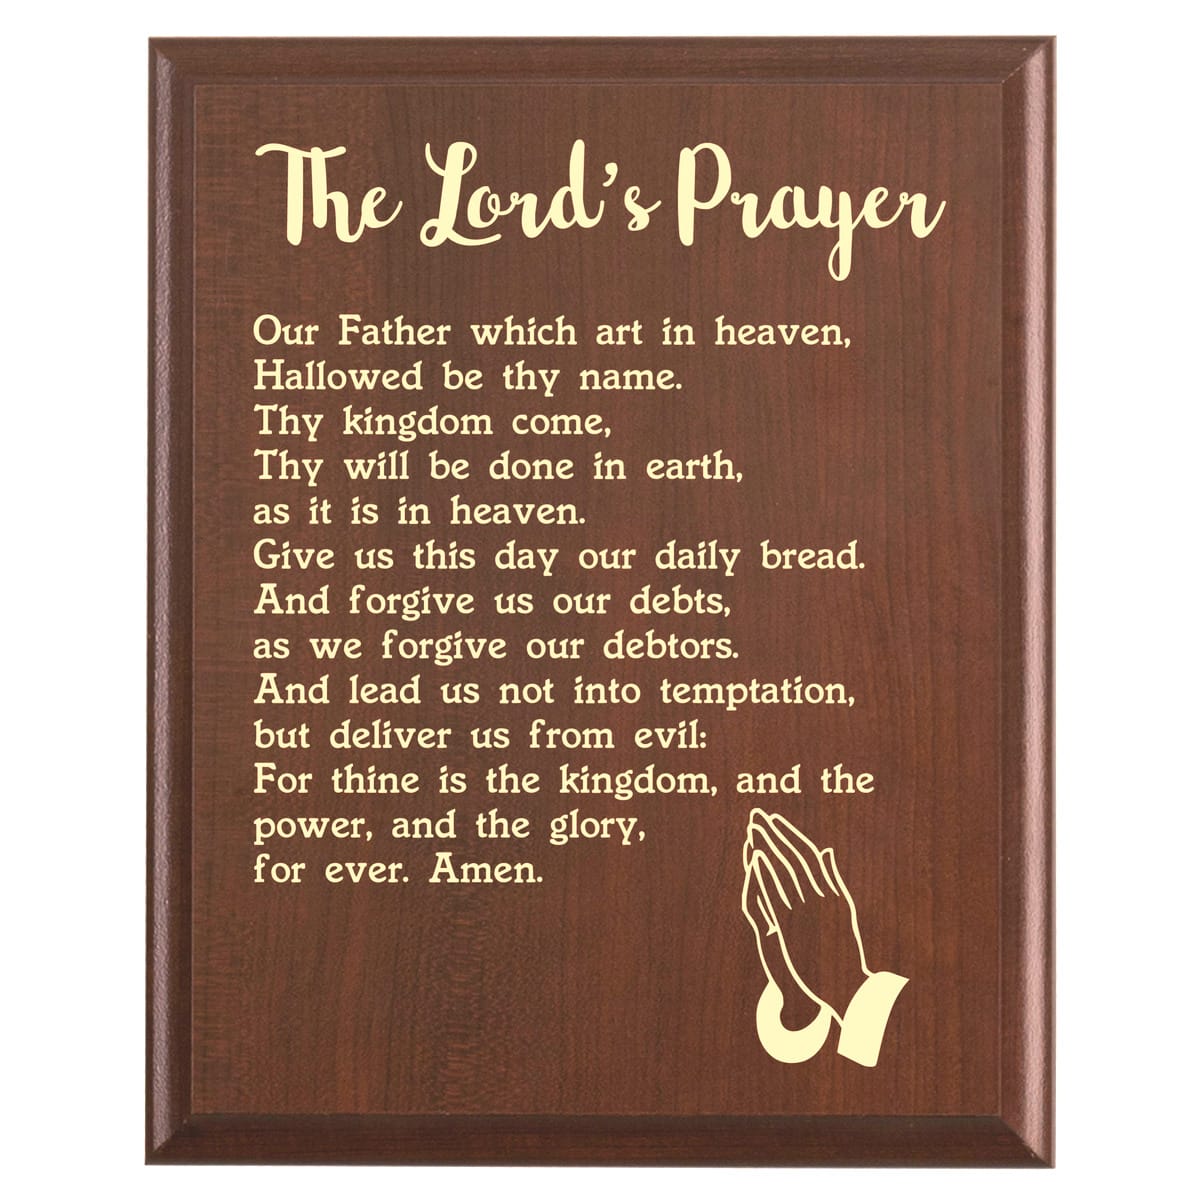 Plaque photo: Lord's Prayer Plaque KJV design with free personalization. Wood style finish with customized text.